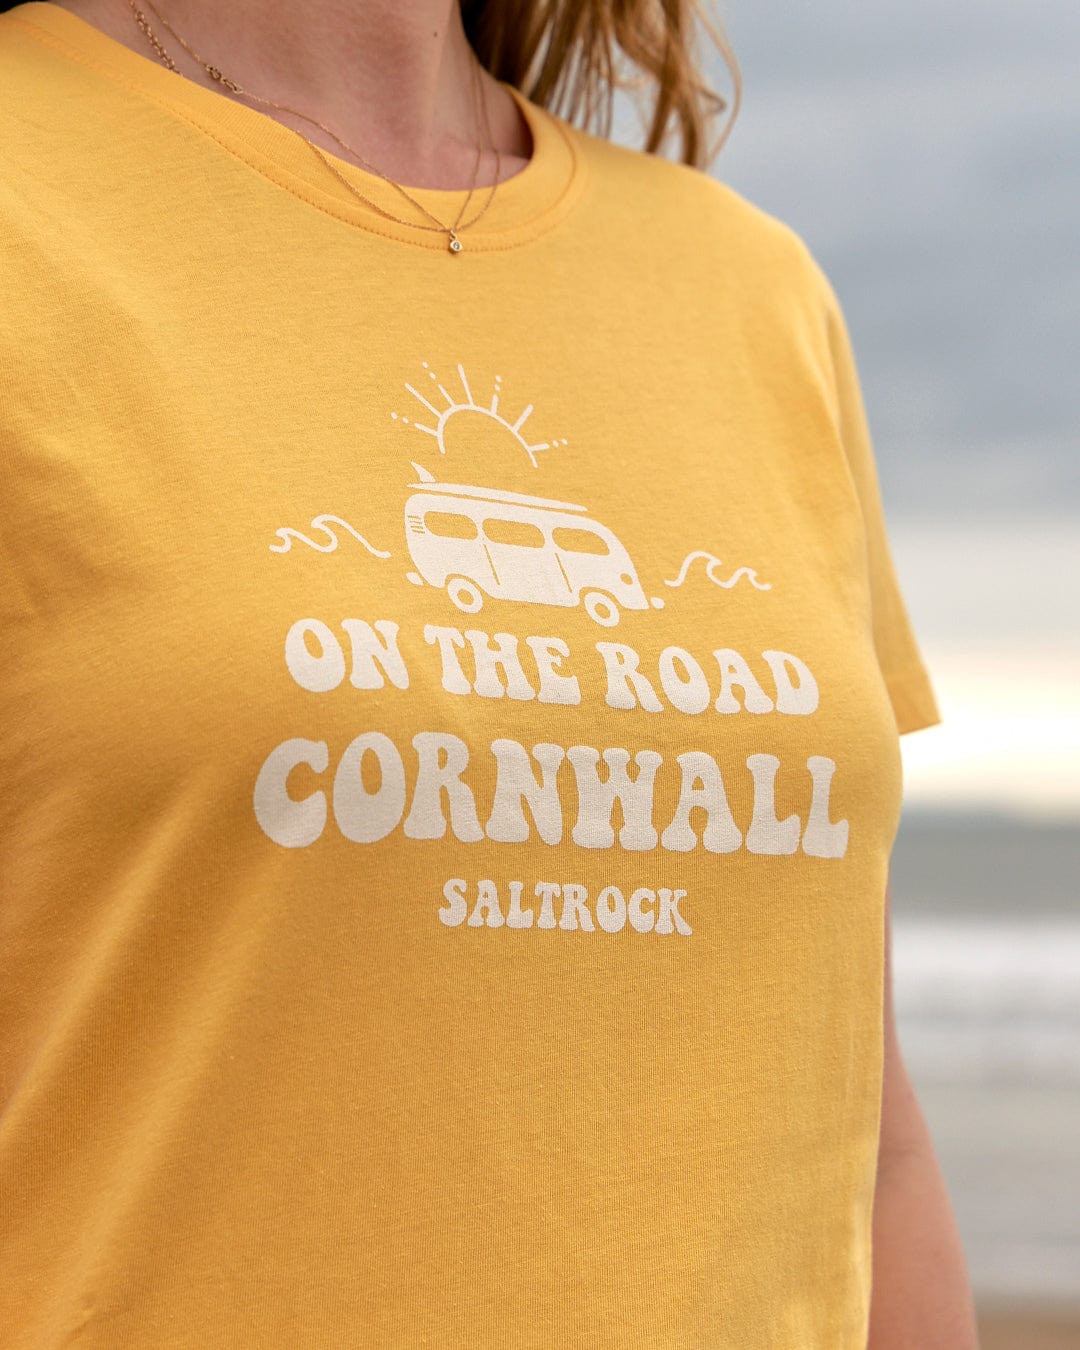 A woman wearing a yellow t-shirt that says On The Road Cornwall Saltrock.